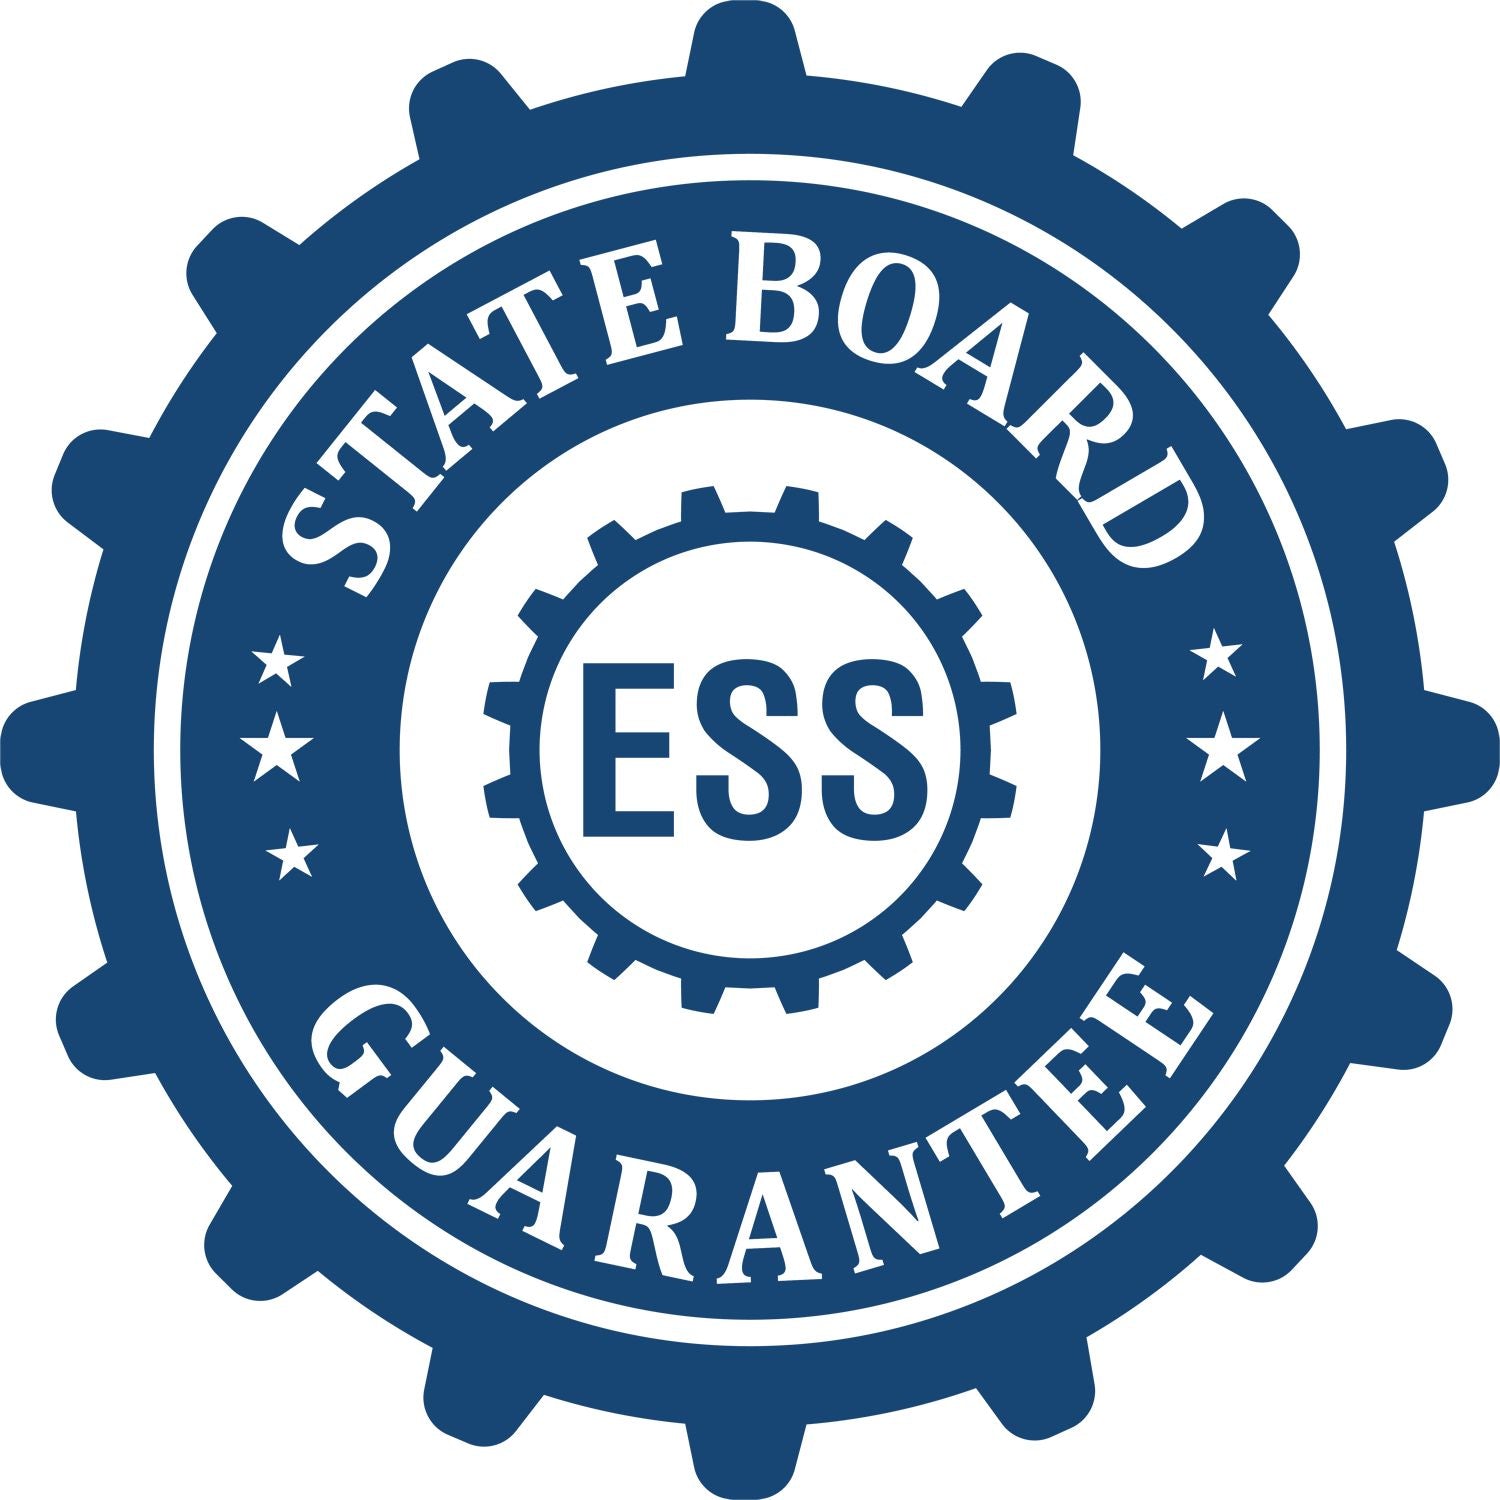 An emblem in a gear shape illustrating a state board guarantee for the Hybrid Mississippi Landscape Architect Seal